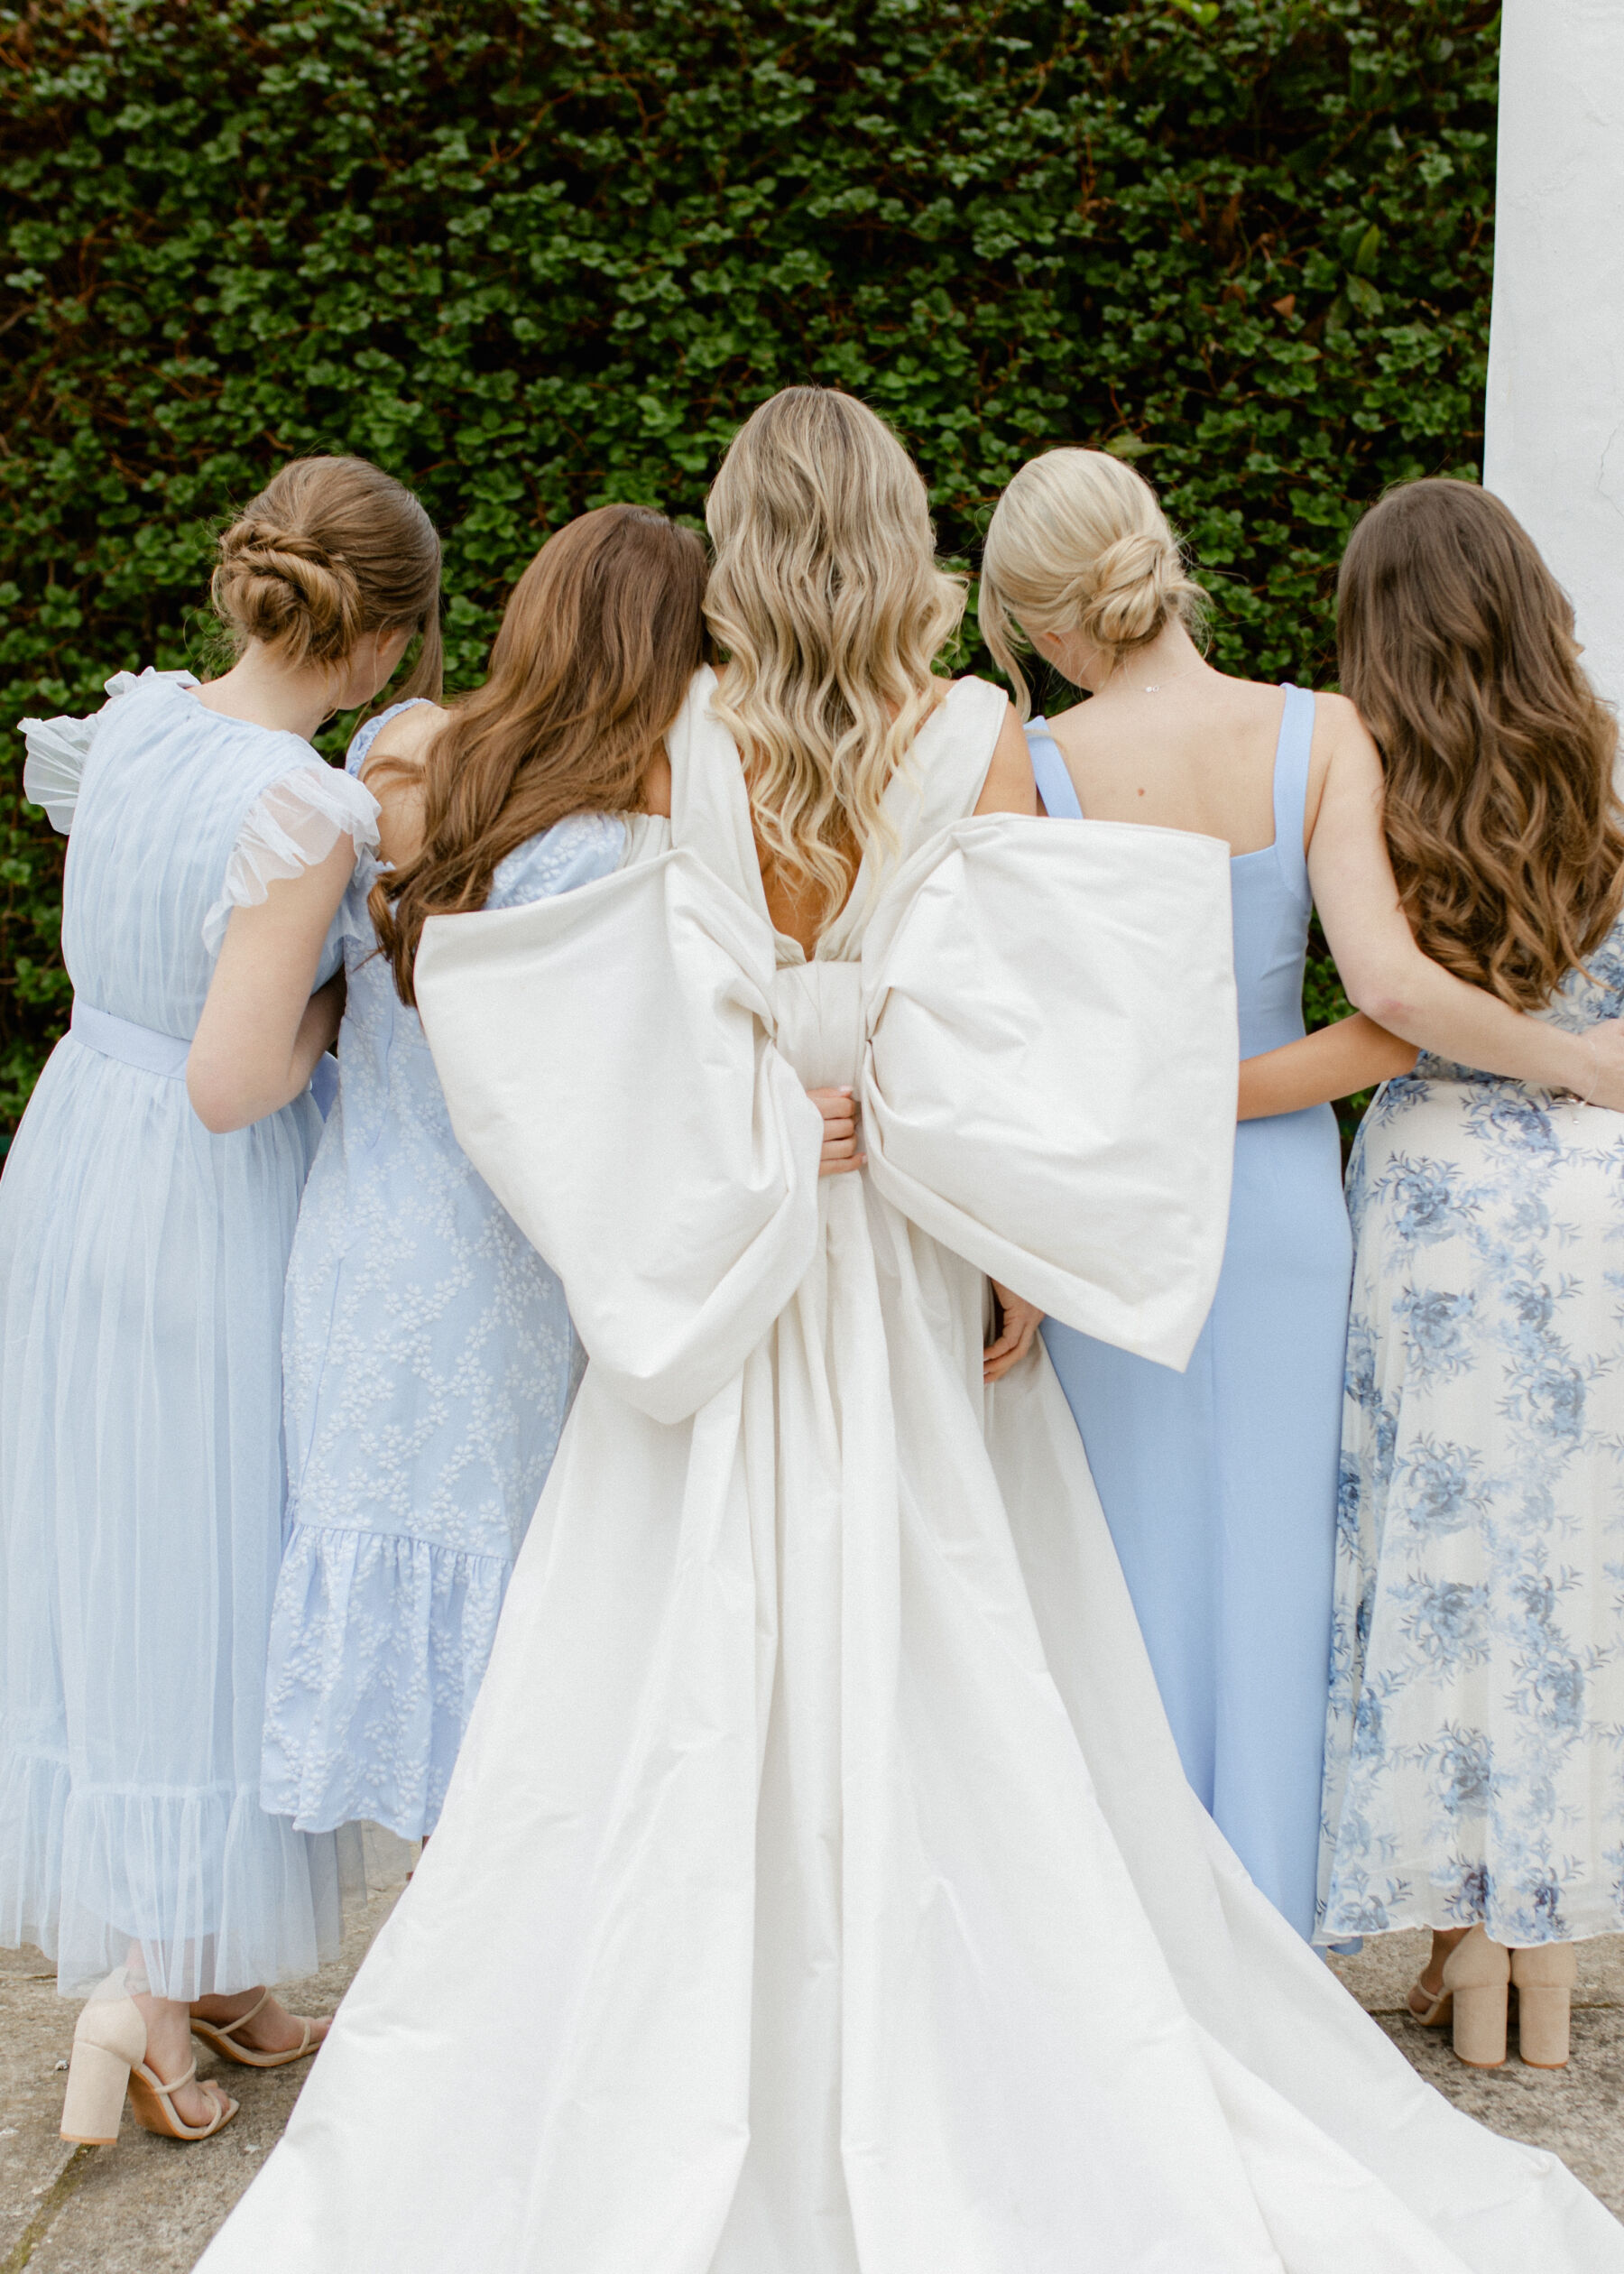 Halfpenny London wedding dress with large bow at the back. Bridesmaids wearing pale blue dresses. 